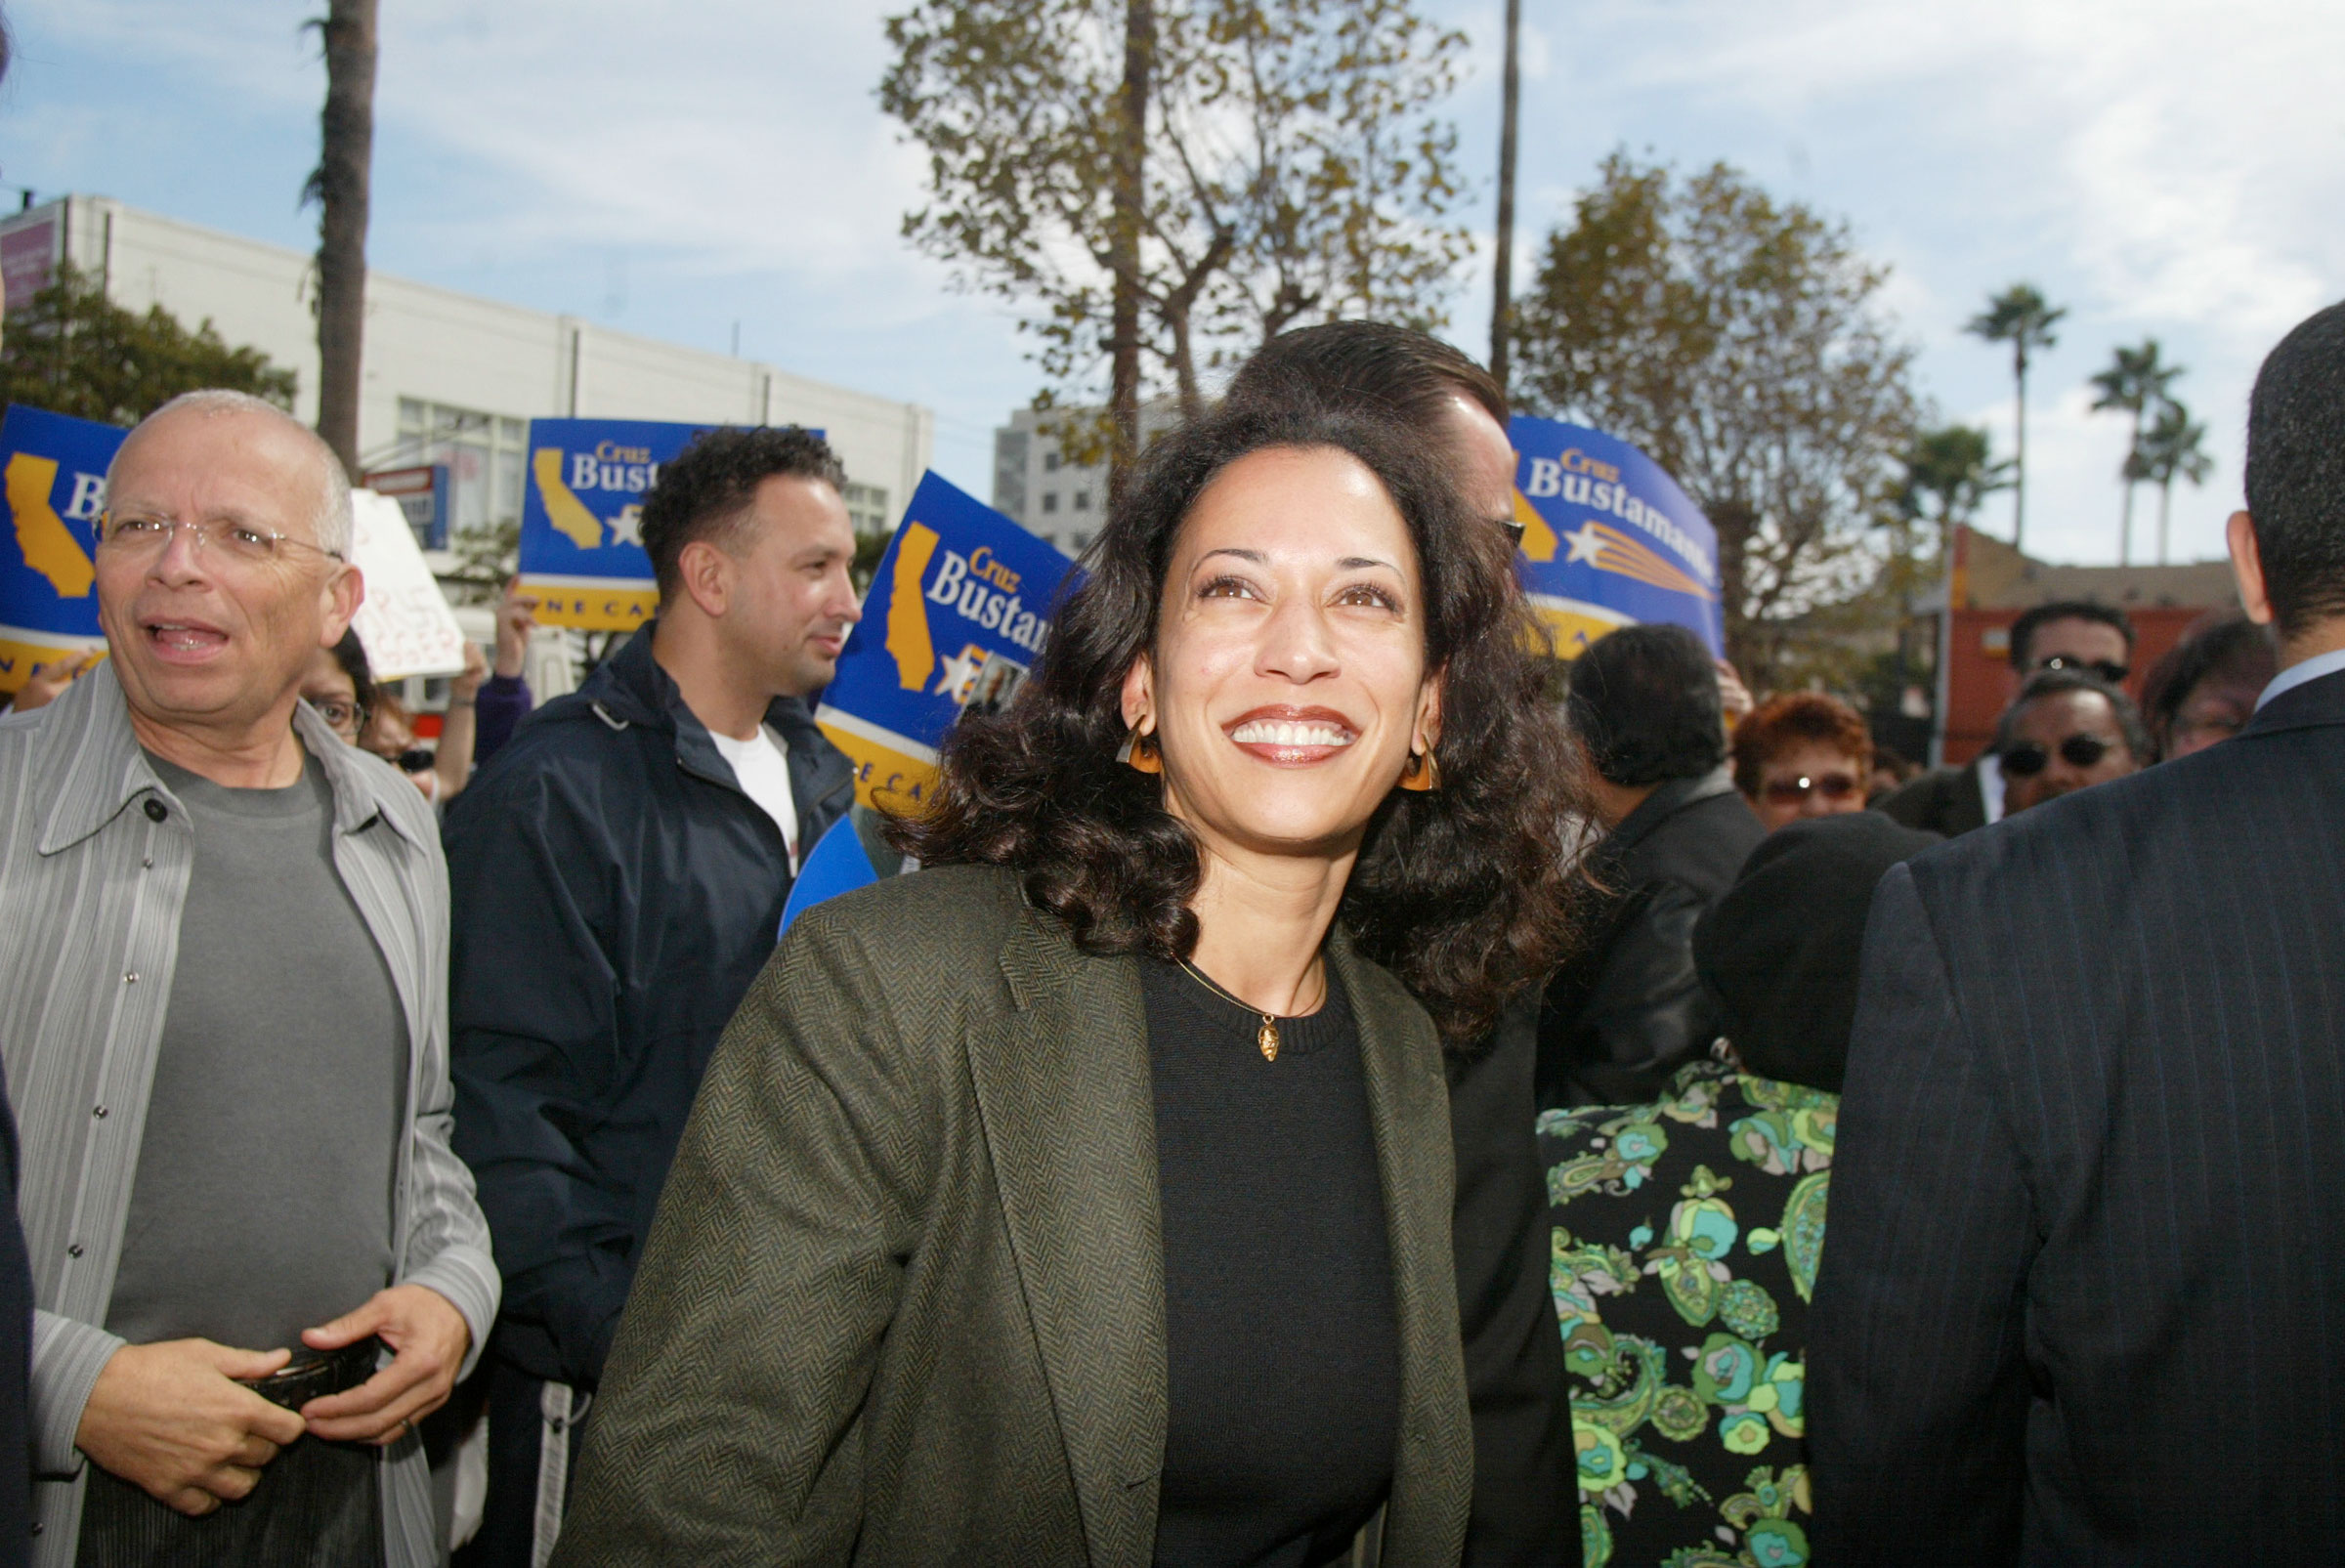 Kamala Harris meets with supporters in front of the 24th street BART station while on the campaign trail with Cruz Bustamonte on Oct. 4, 2003. Harris was running for District Attorney in San Francisco.